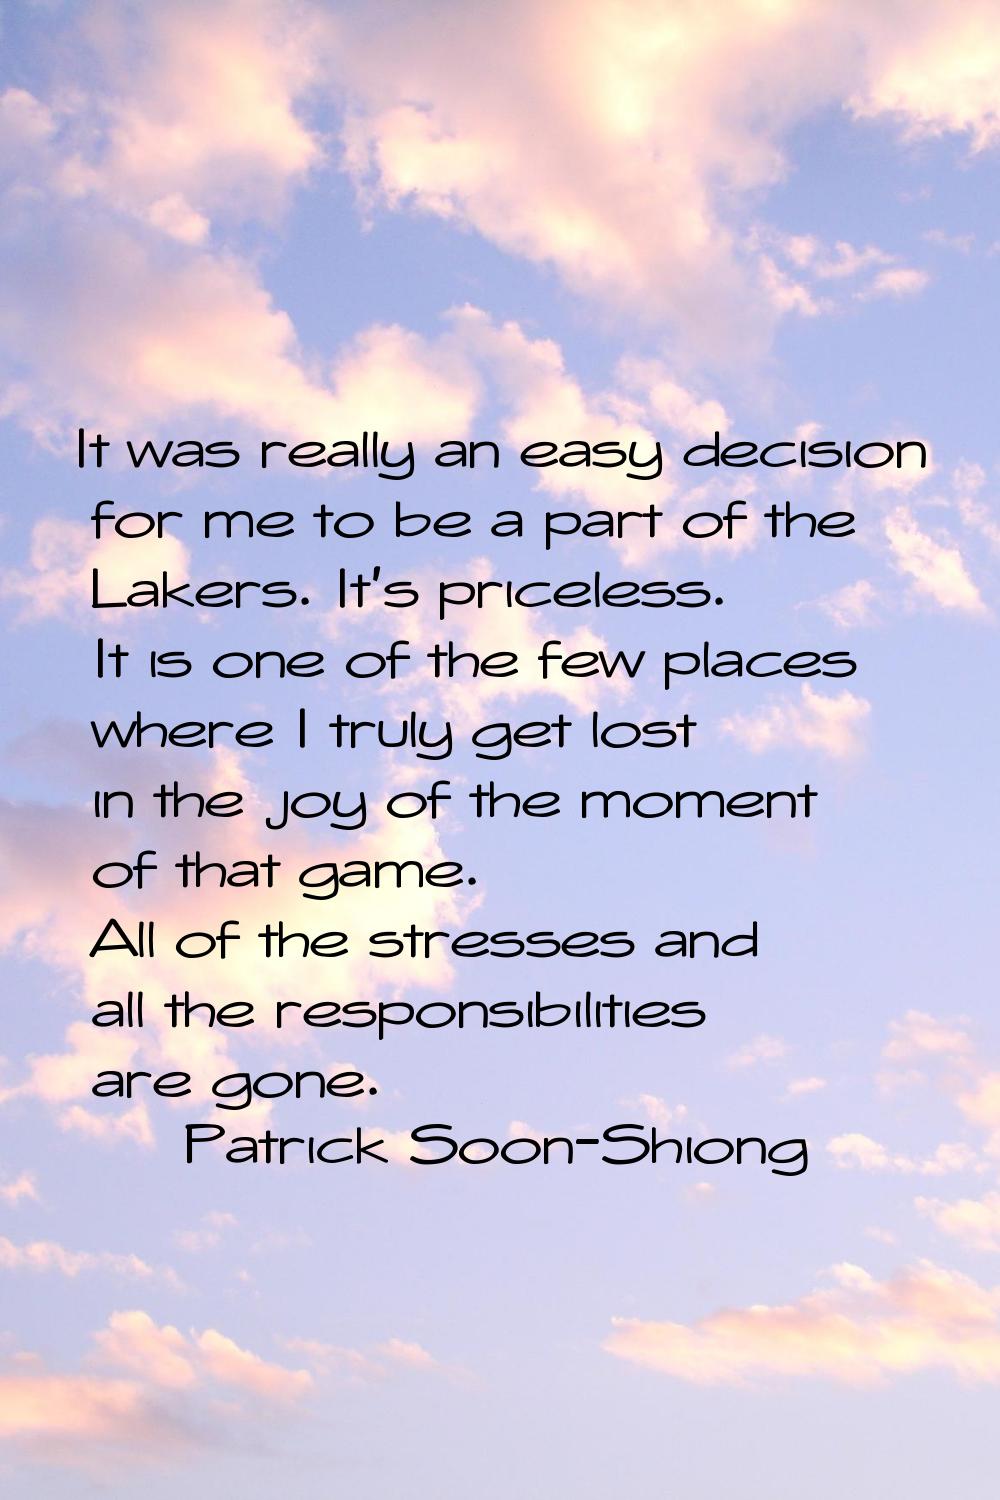 It was really an easy decision for me to be a part of the Lakers. It's priceless. It is one of the 